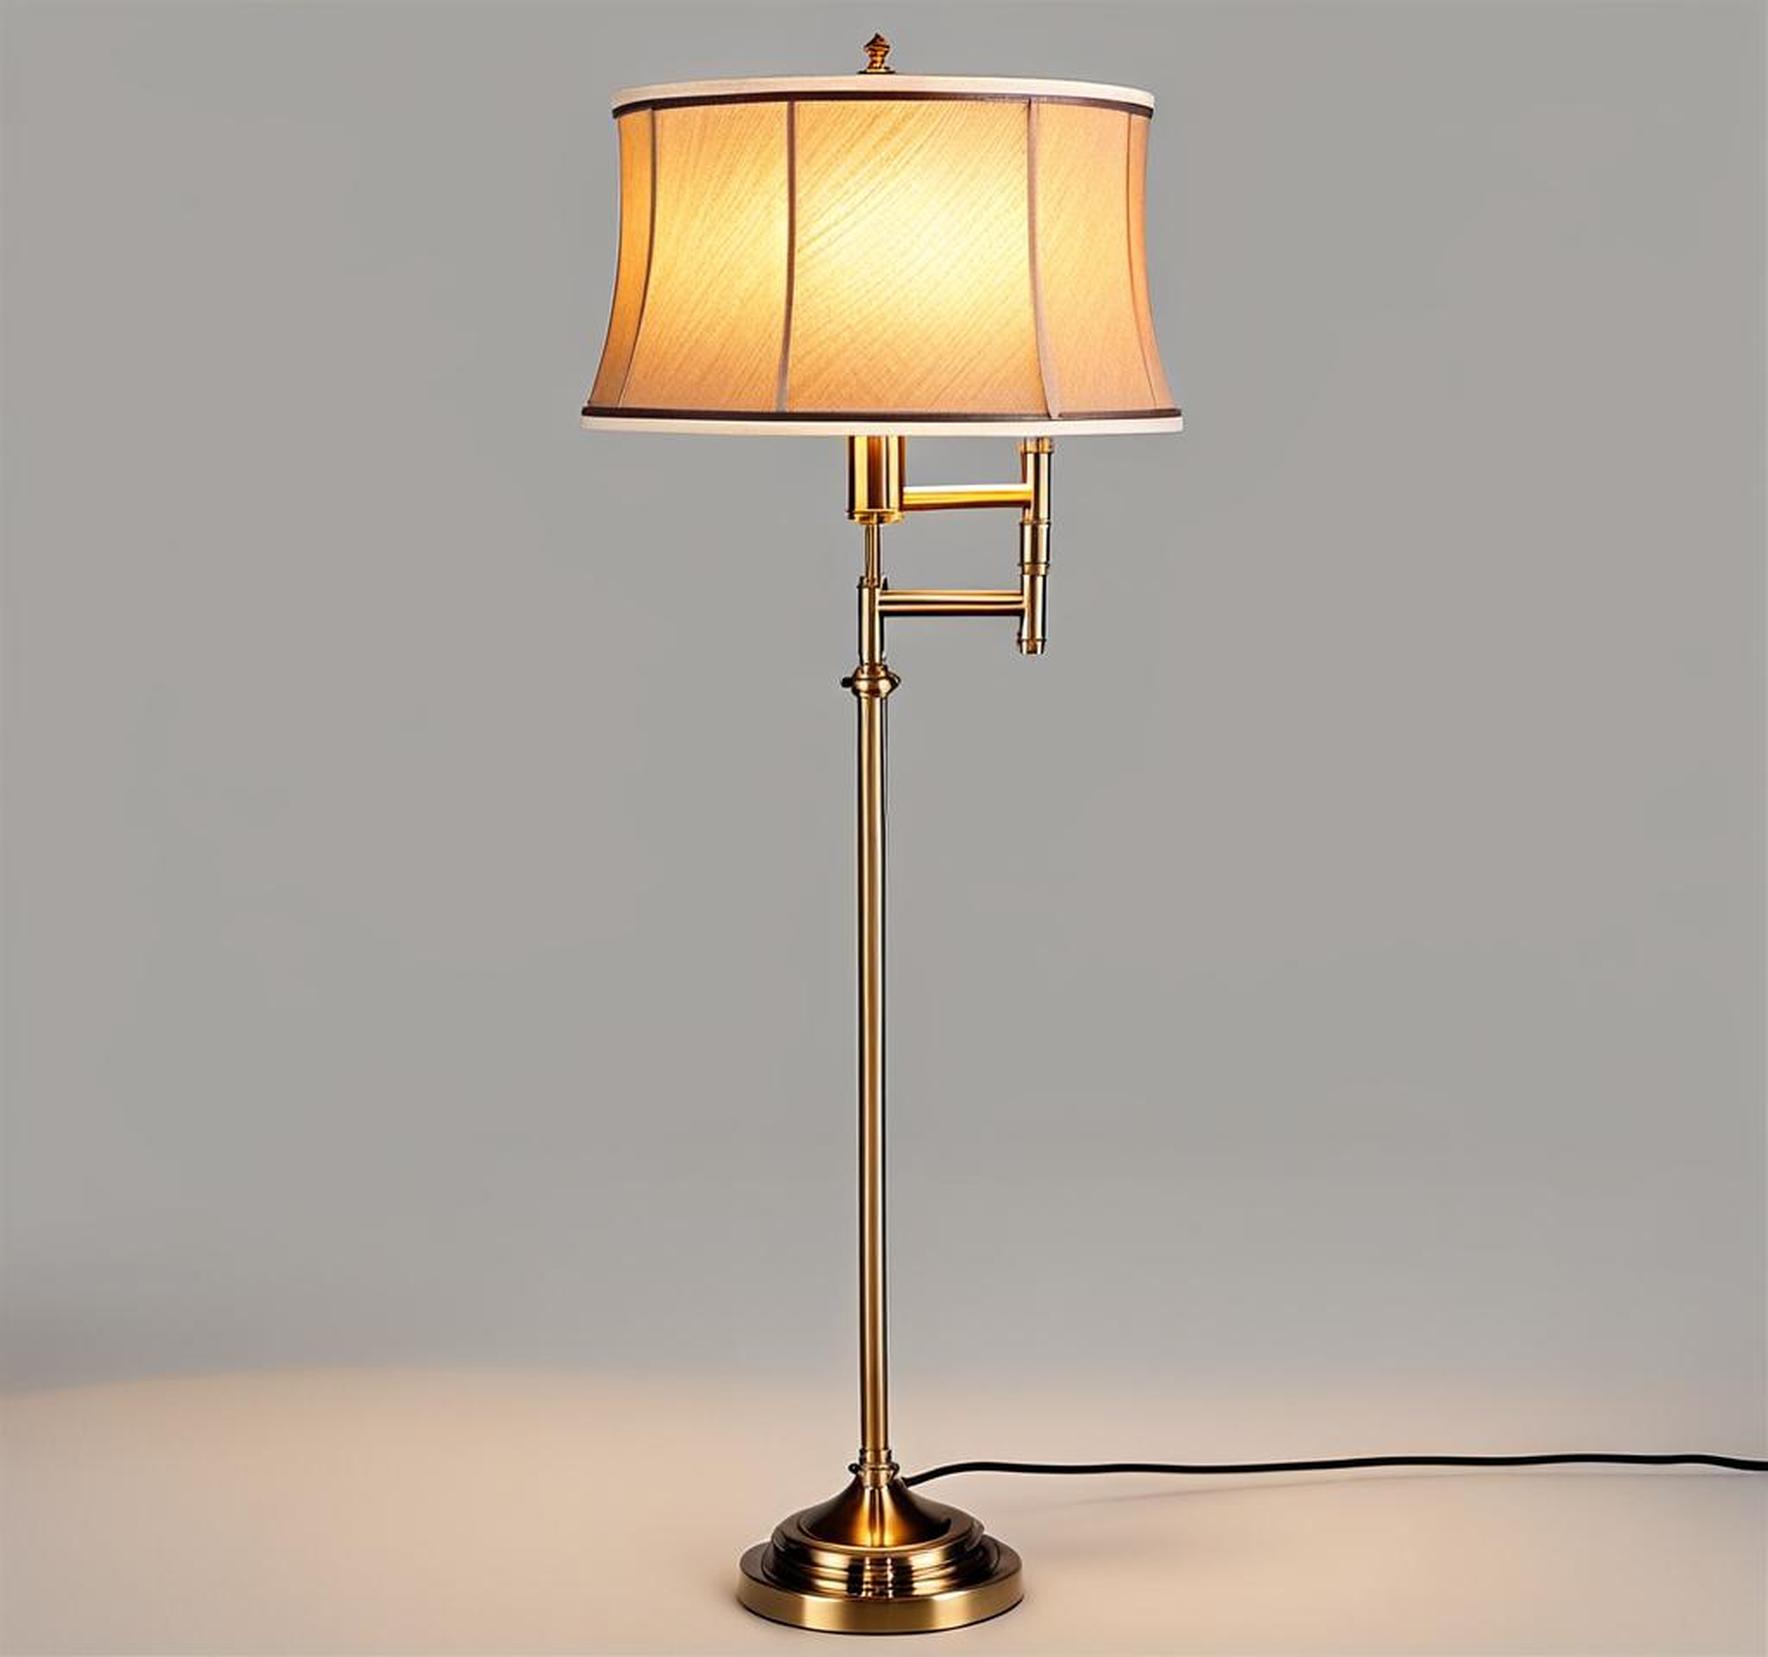 Light Any Room Perfectly with a 3-Way Swing Arm Floor Lamp